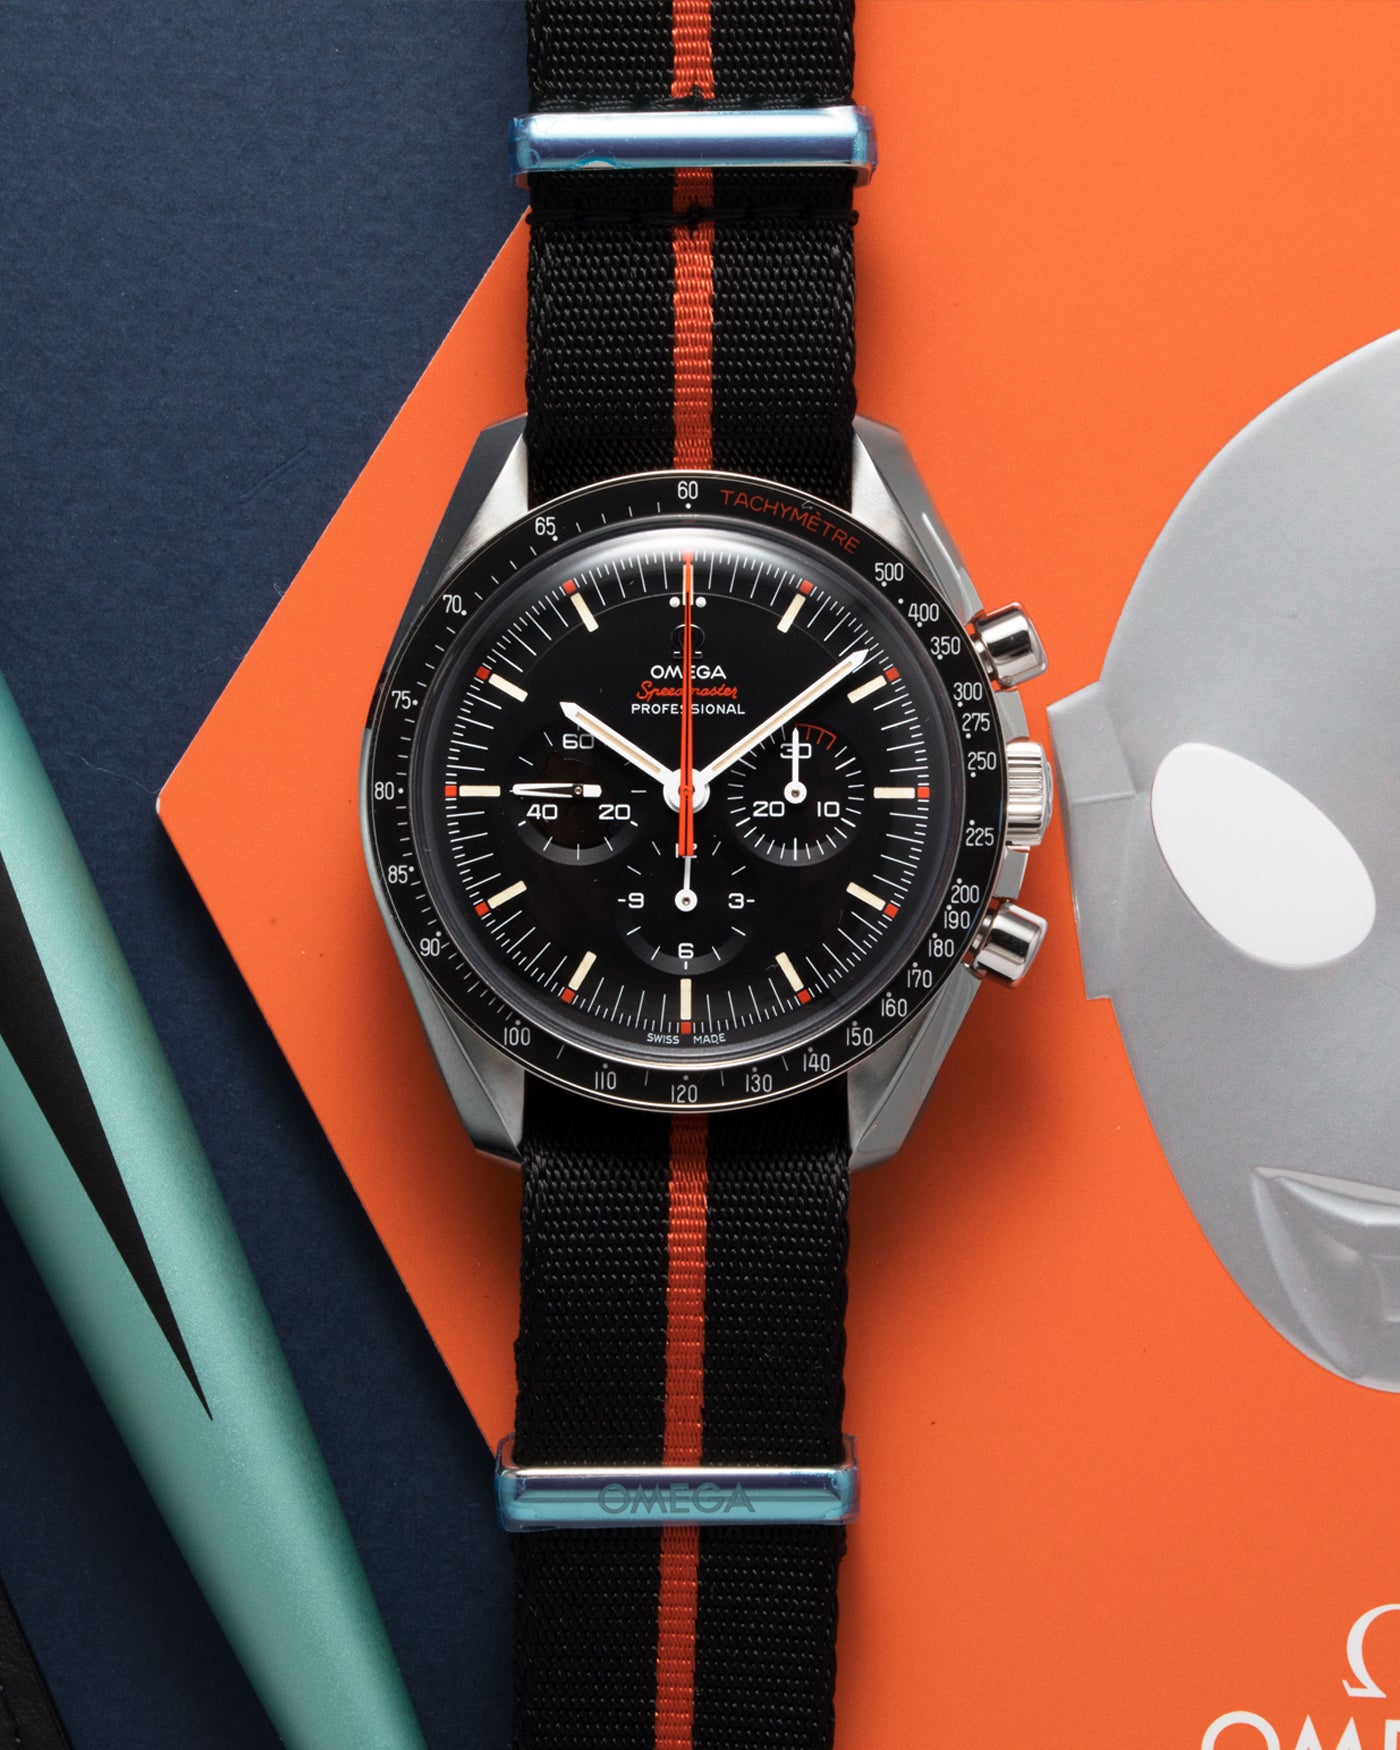 Omega Speedmaster Speedy Tuesday Ultraman Watch | S.Song Vintage Timepieces – S.Song Watches